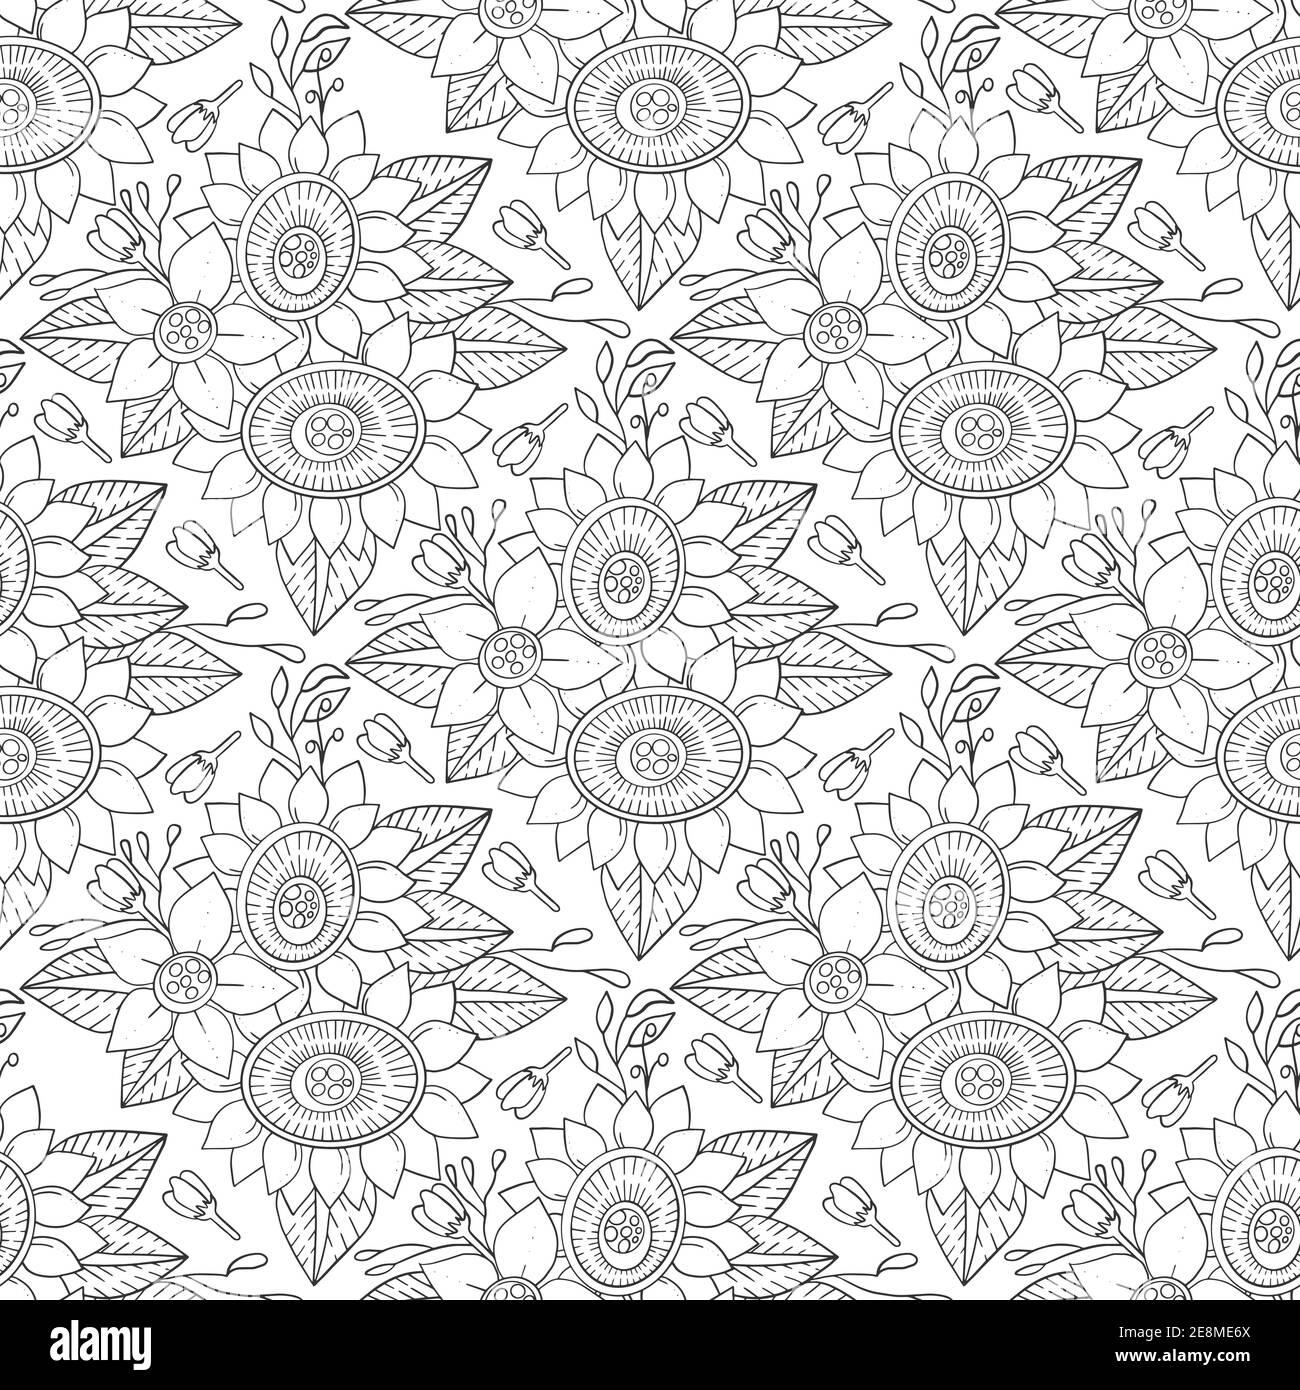 Coloring for adults Free Stock Vectors